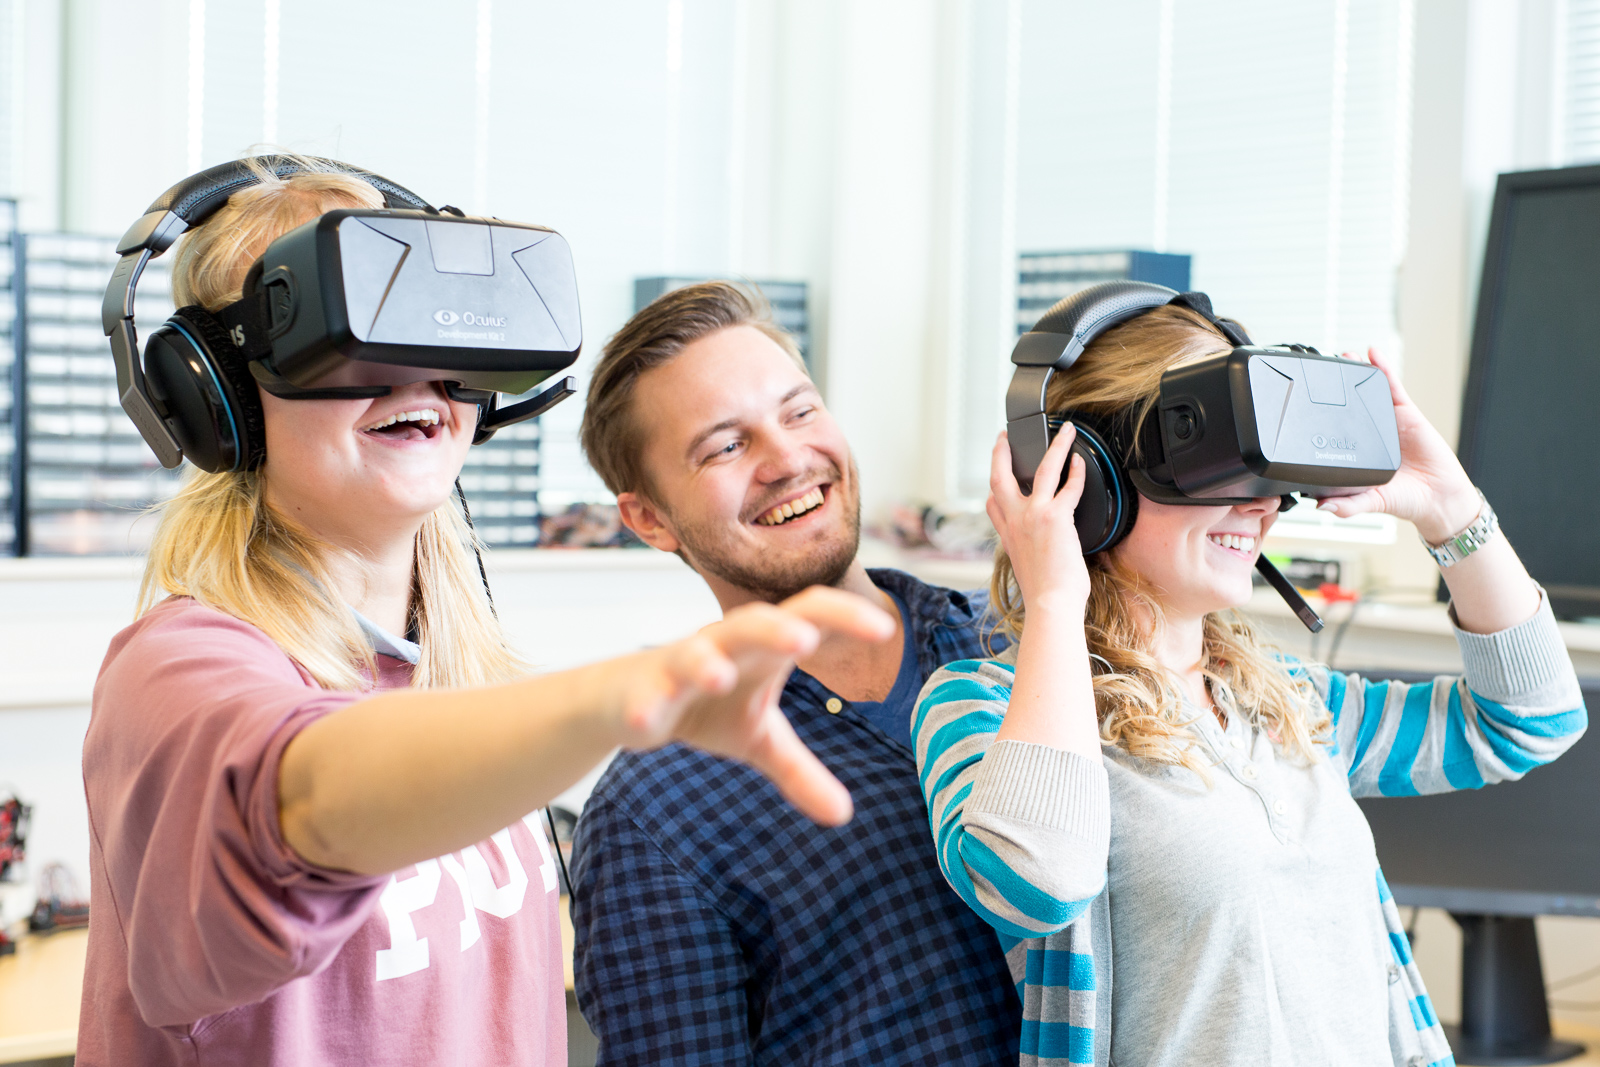 VR on students